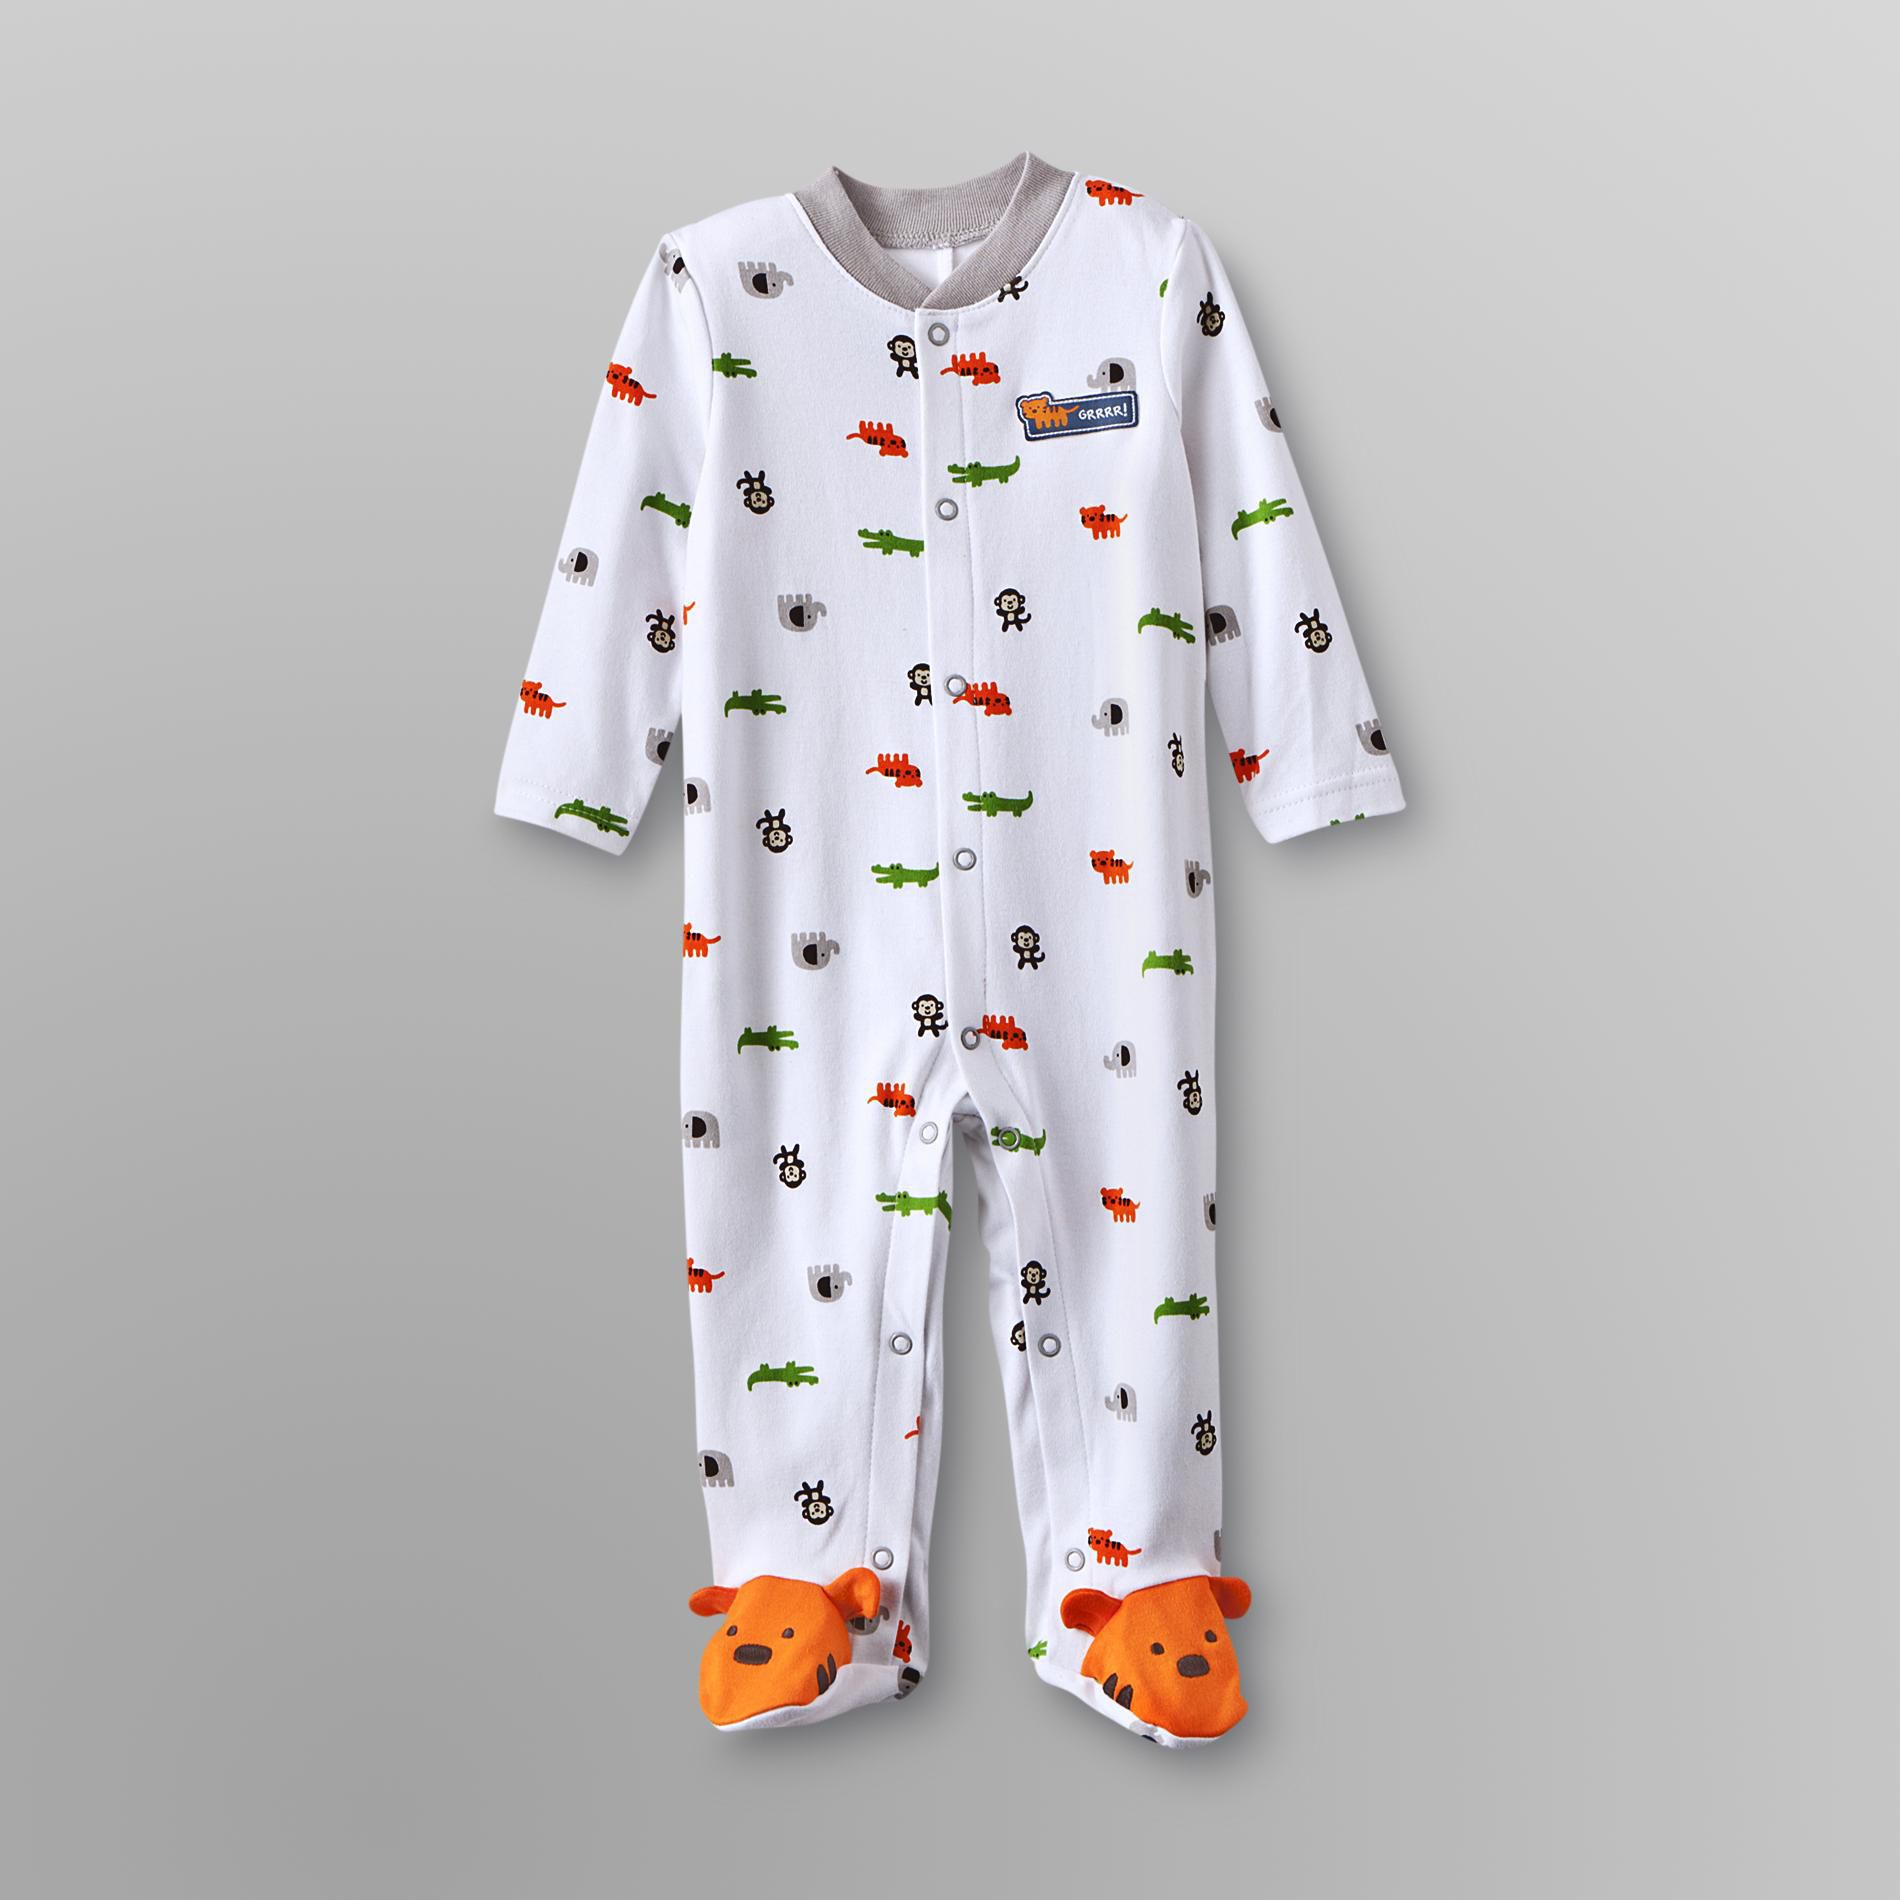 Little Wonders Infant Boy's Footed Pajamas - Jungle Animals